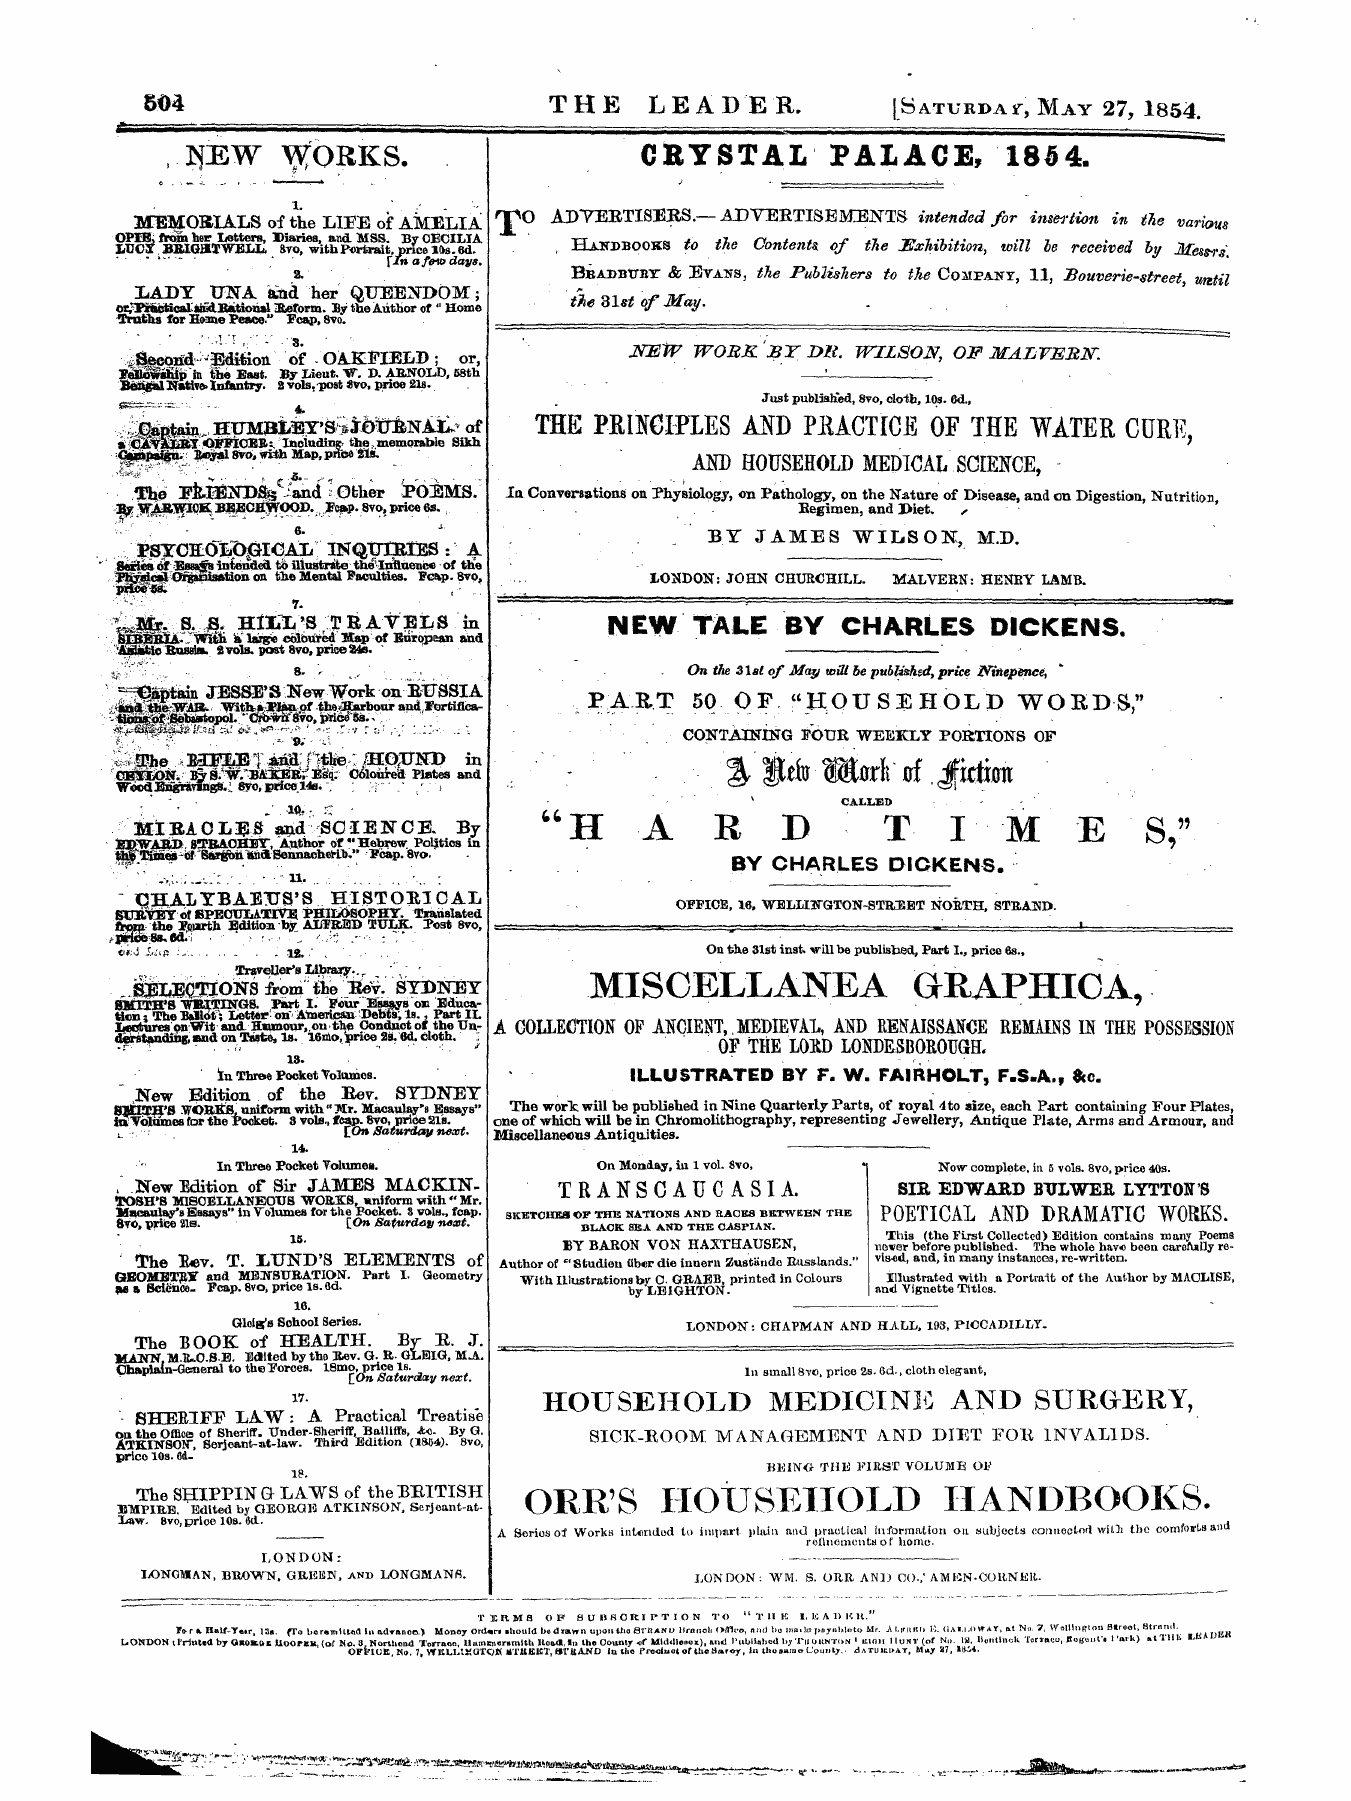 Leader (1850-1860): jS F Y, 1st edition: 24